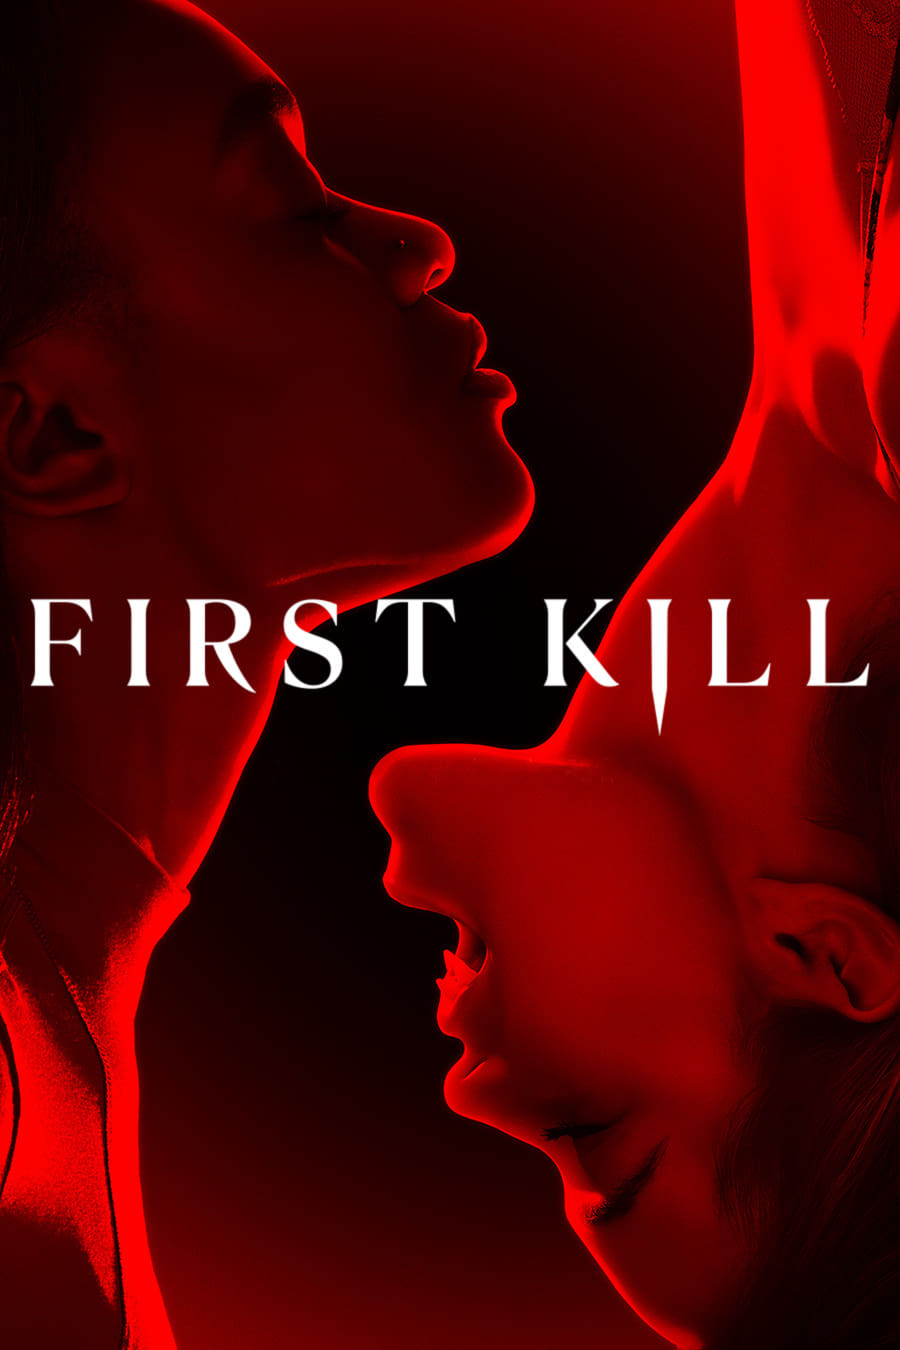 First Kill TV Shows About Based On Novel Or Book